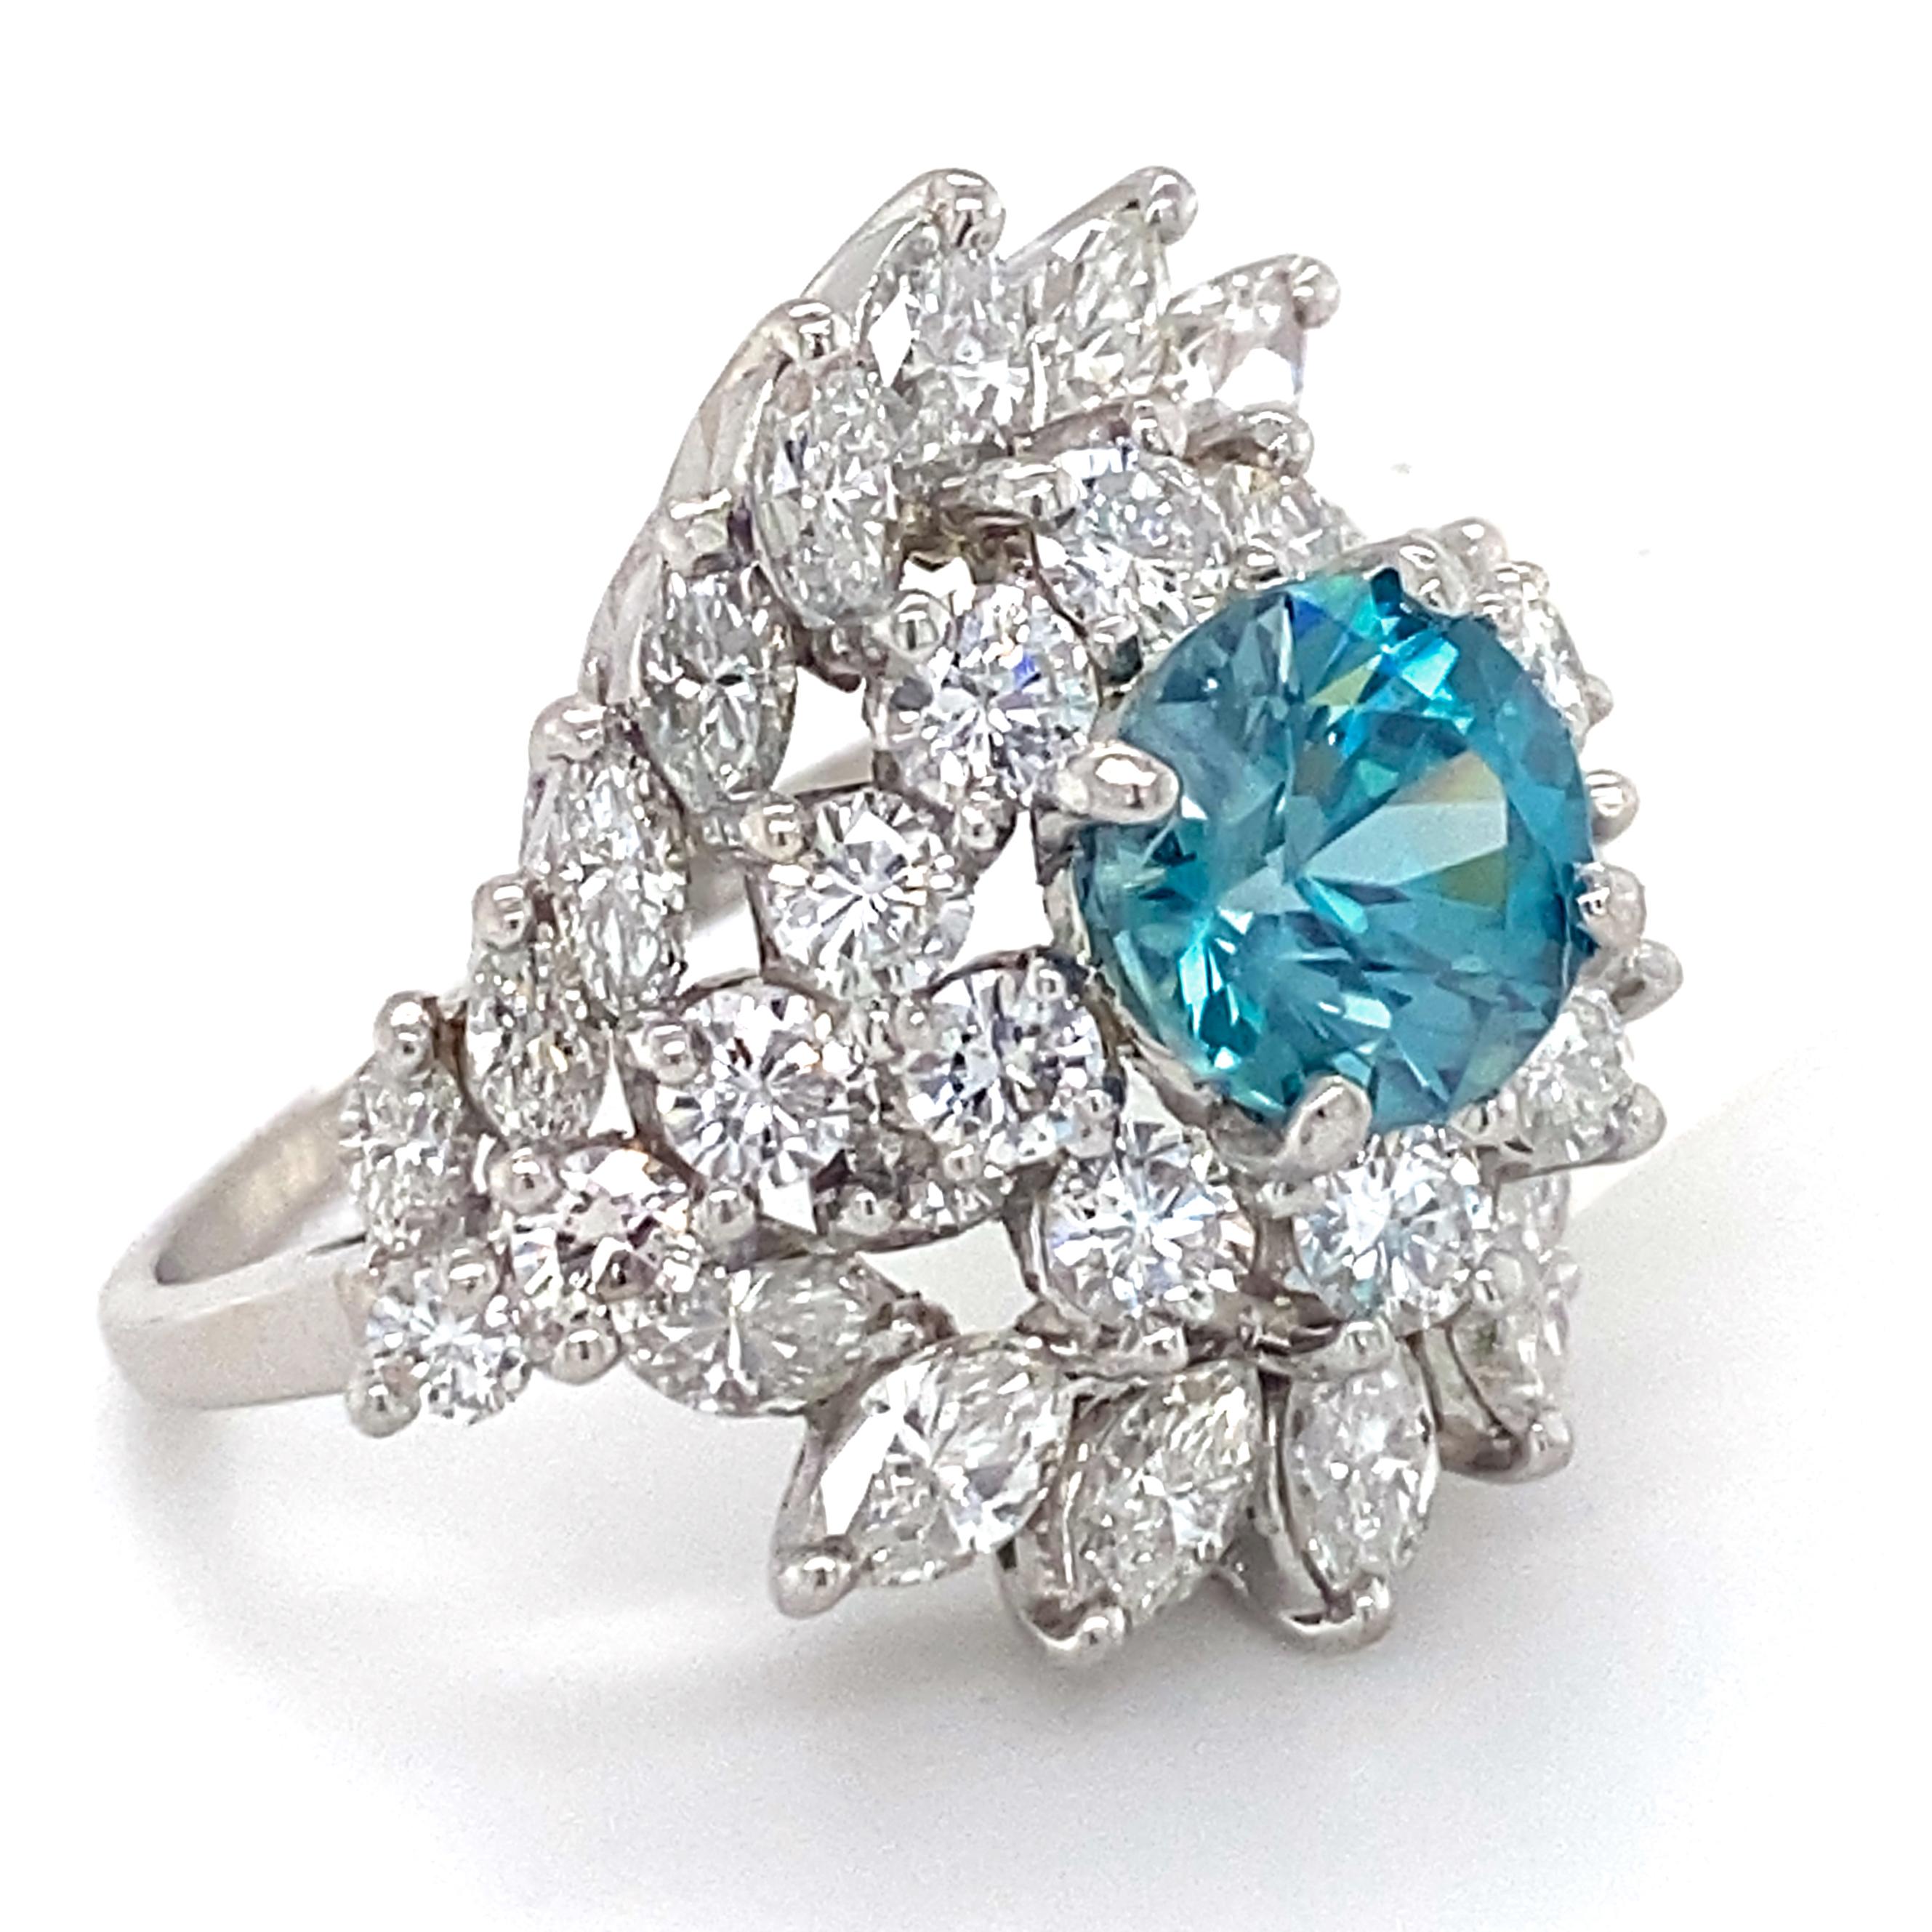 These kinds of cocktail rings were as common as cigarettes, girdles and, well, cocktails in the 1950's and 1960's.  Most were 14 karat department store rings with commercial quality diamonds and indifferent workmanship, with an emphasis more on